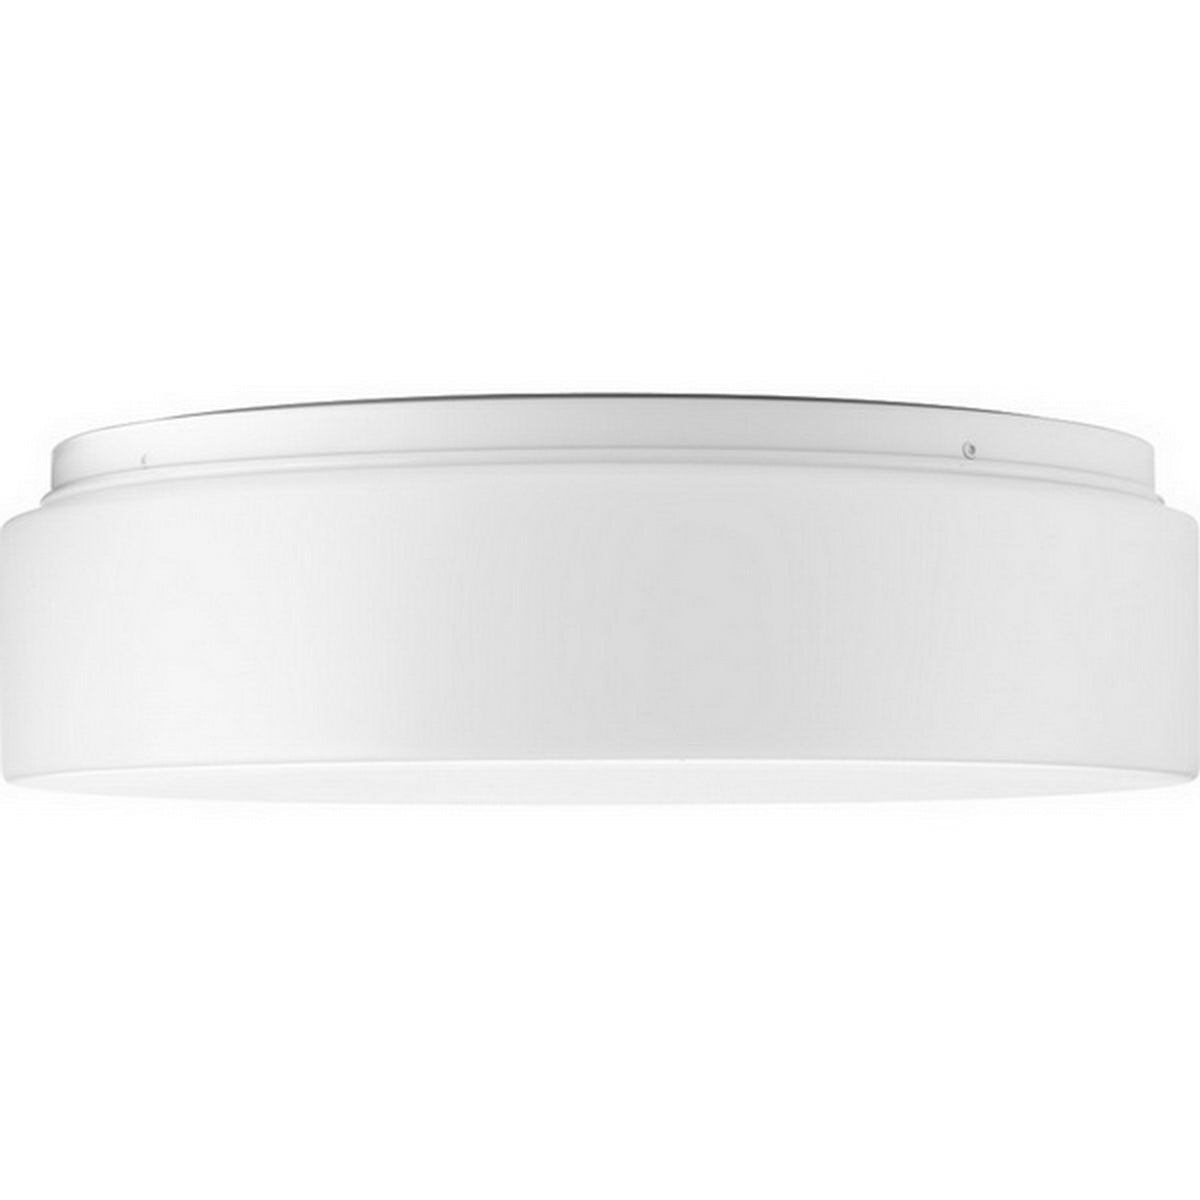 Drums and Clouds 14 in LED Flush Mount Light White finish